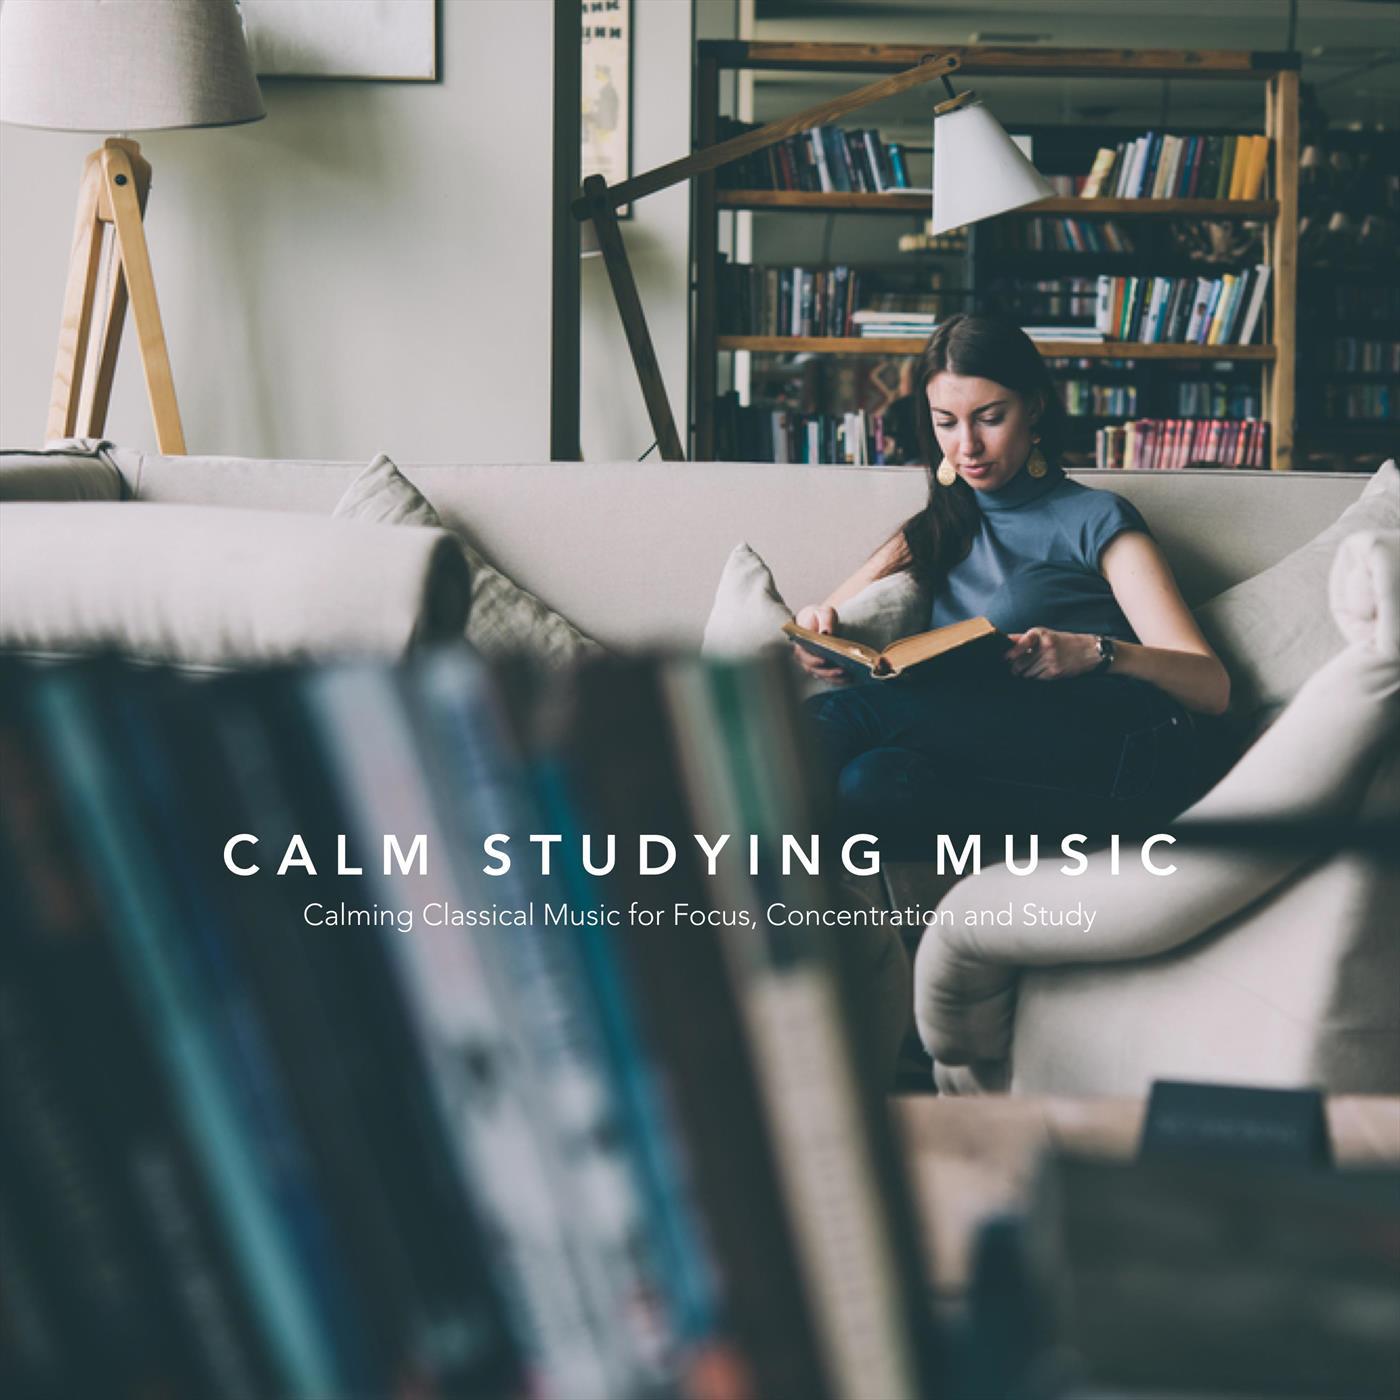 Calm Studying Music: Calming Classical Music for Focus, Concentration and Study